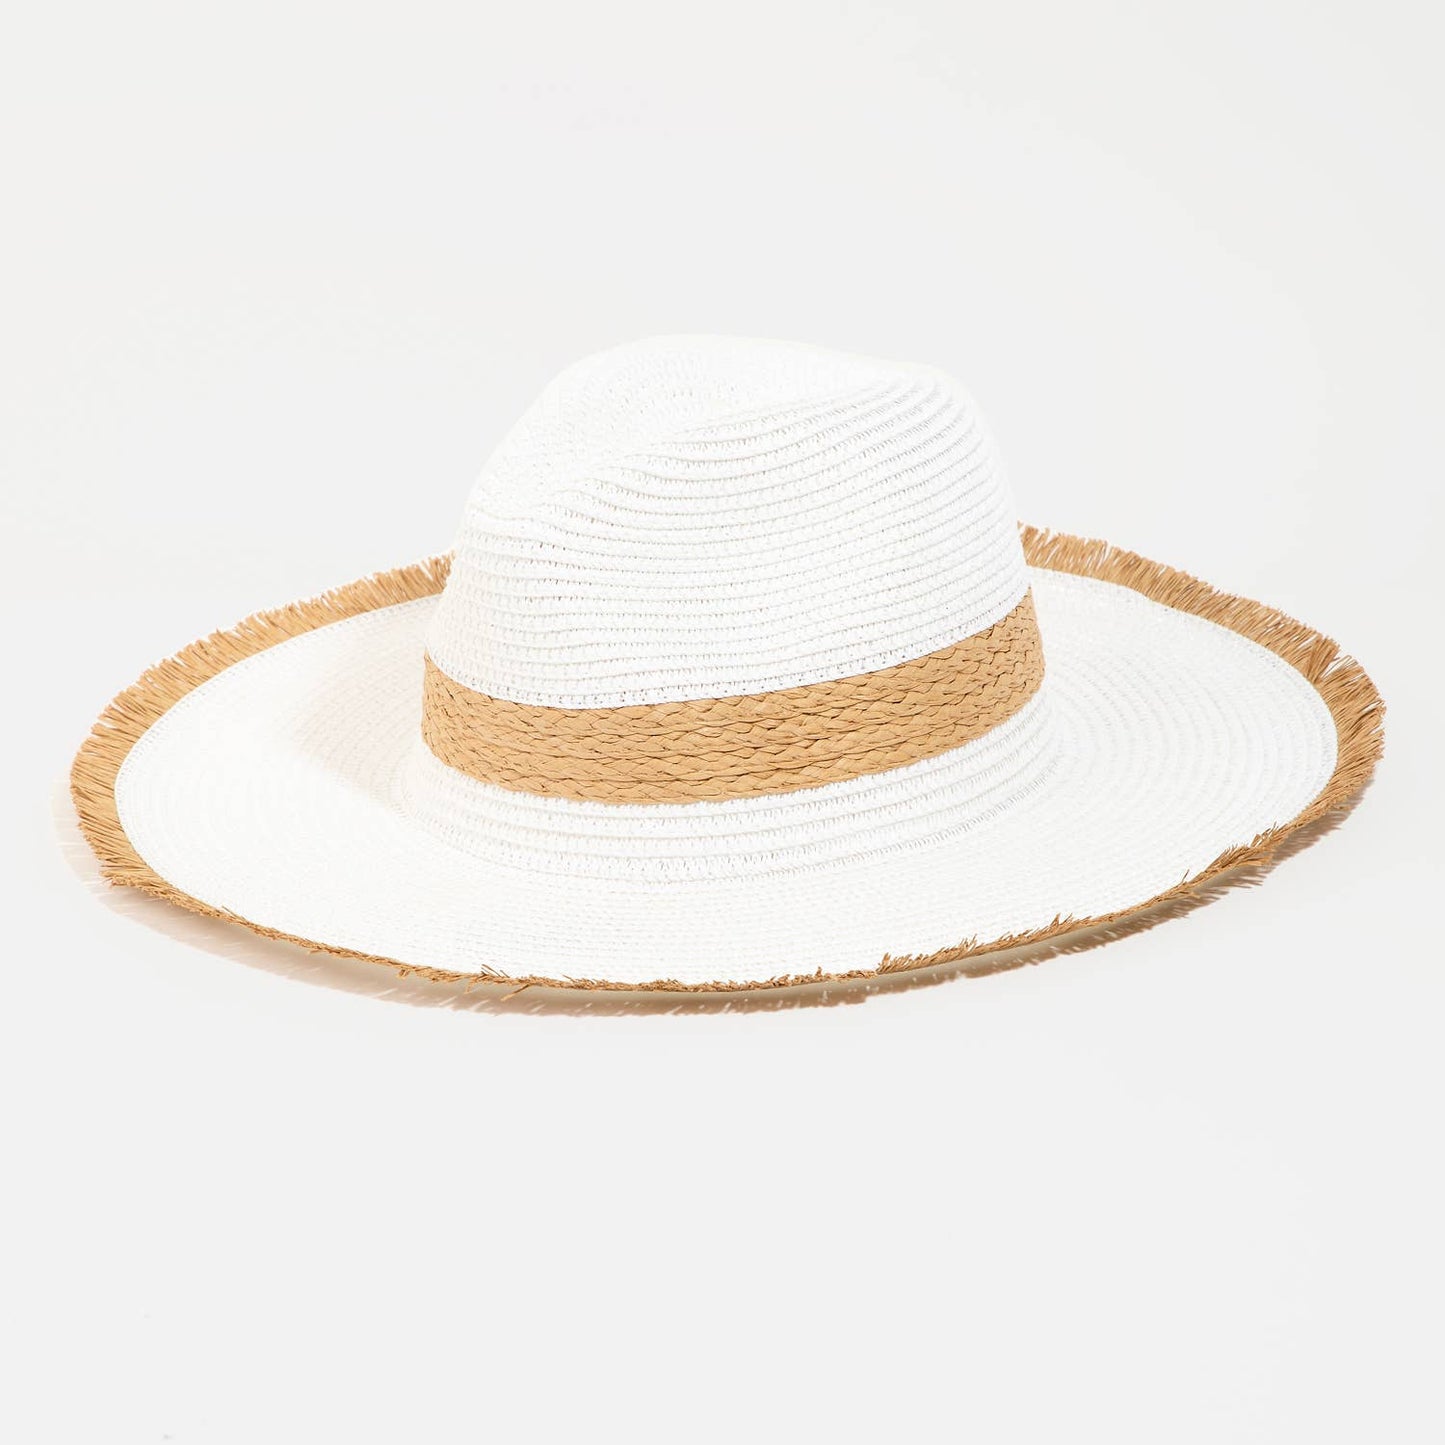 Collections by Fame Accessories - Flat Brim Straw Braided Strap Sun Hat - CLASSY CLOSET BOUTIQUECollections by Fame Accessories - Flat Brim Straw Braided Strap Sun HatBAGS & ACCESSORIESMMT8970WH